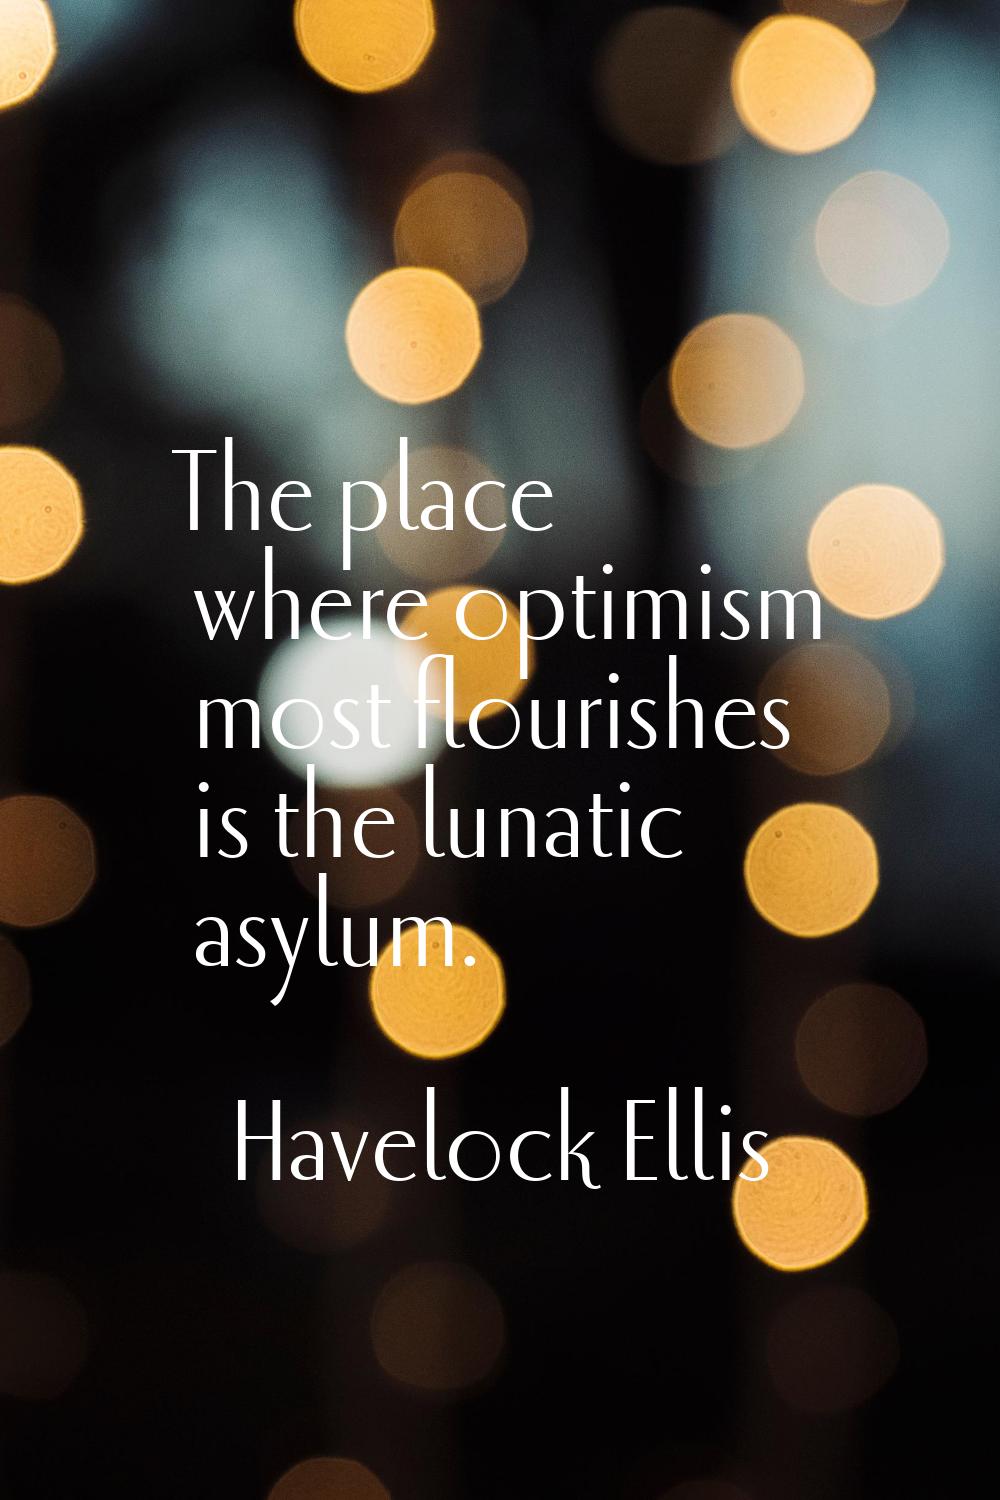 The place where optimism most flourishes is the lunatic asylum.